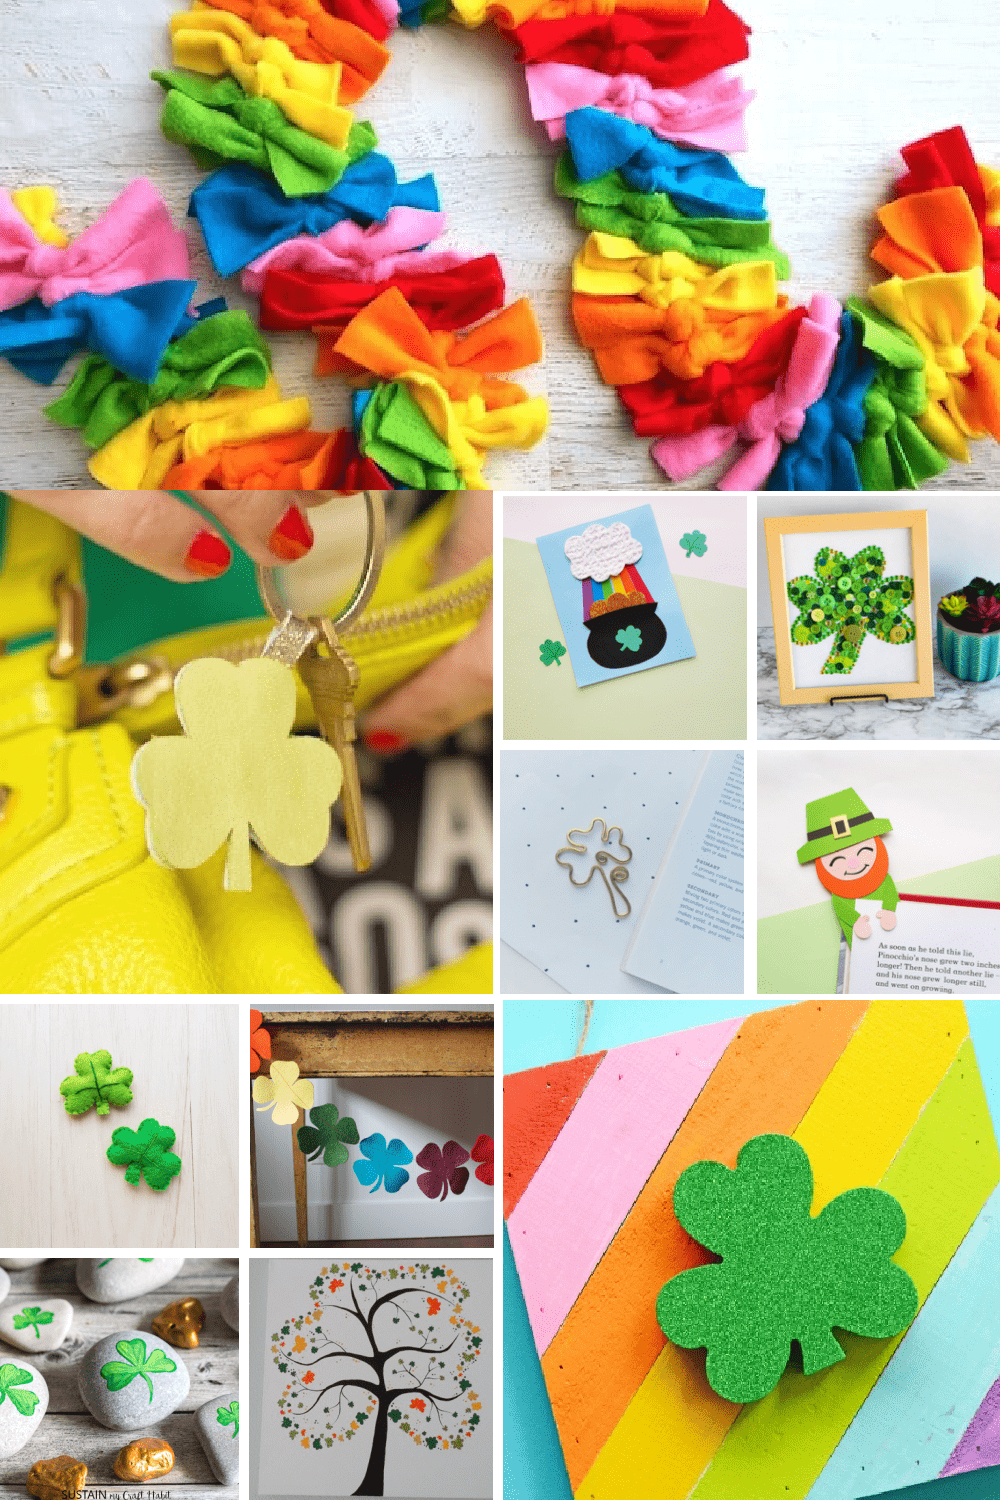 Fun and Festive St. Patrick’s Day Crafts for Teens